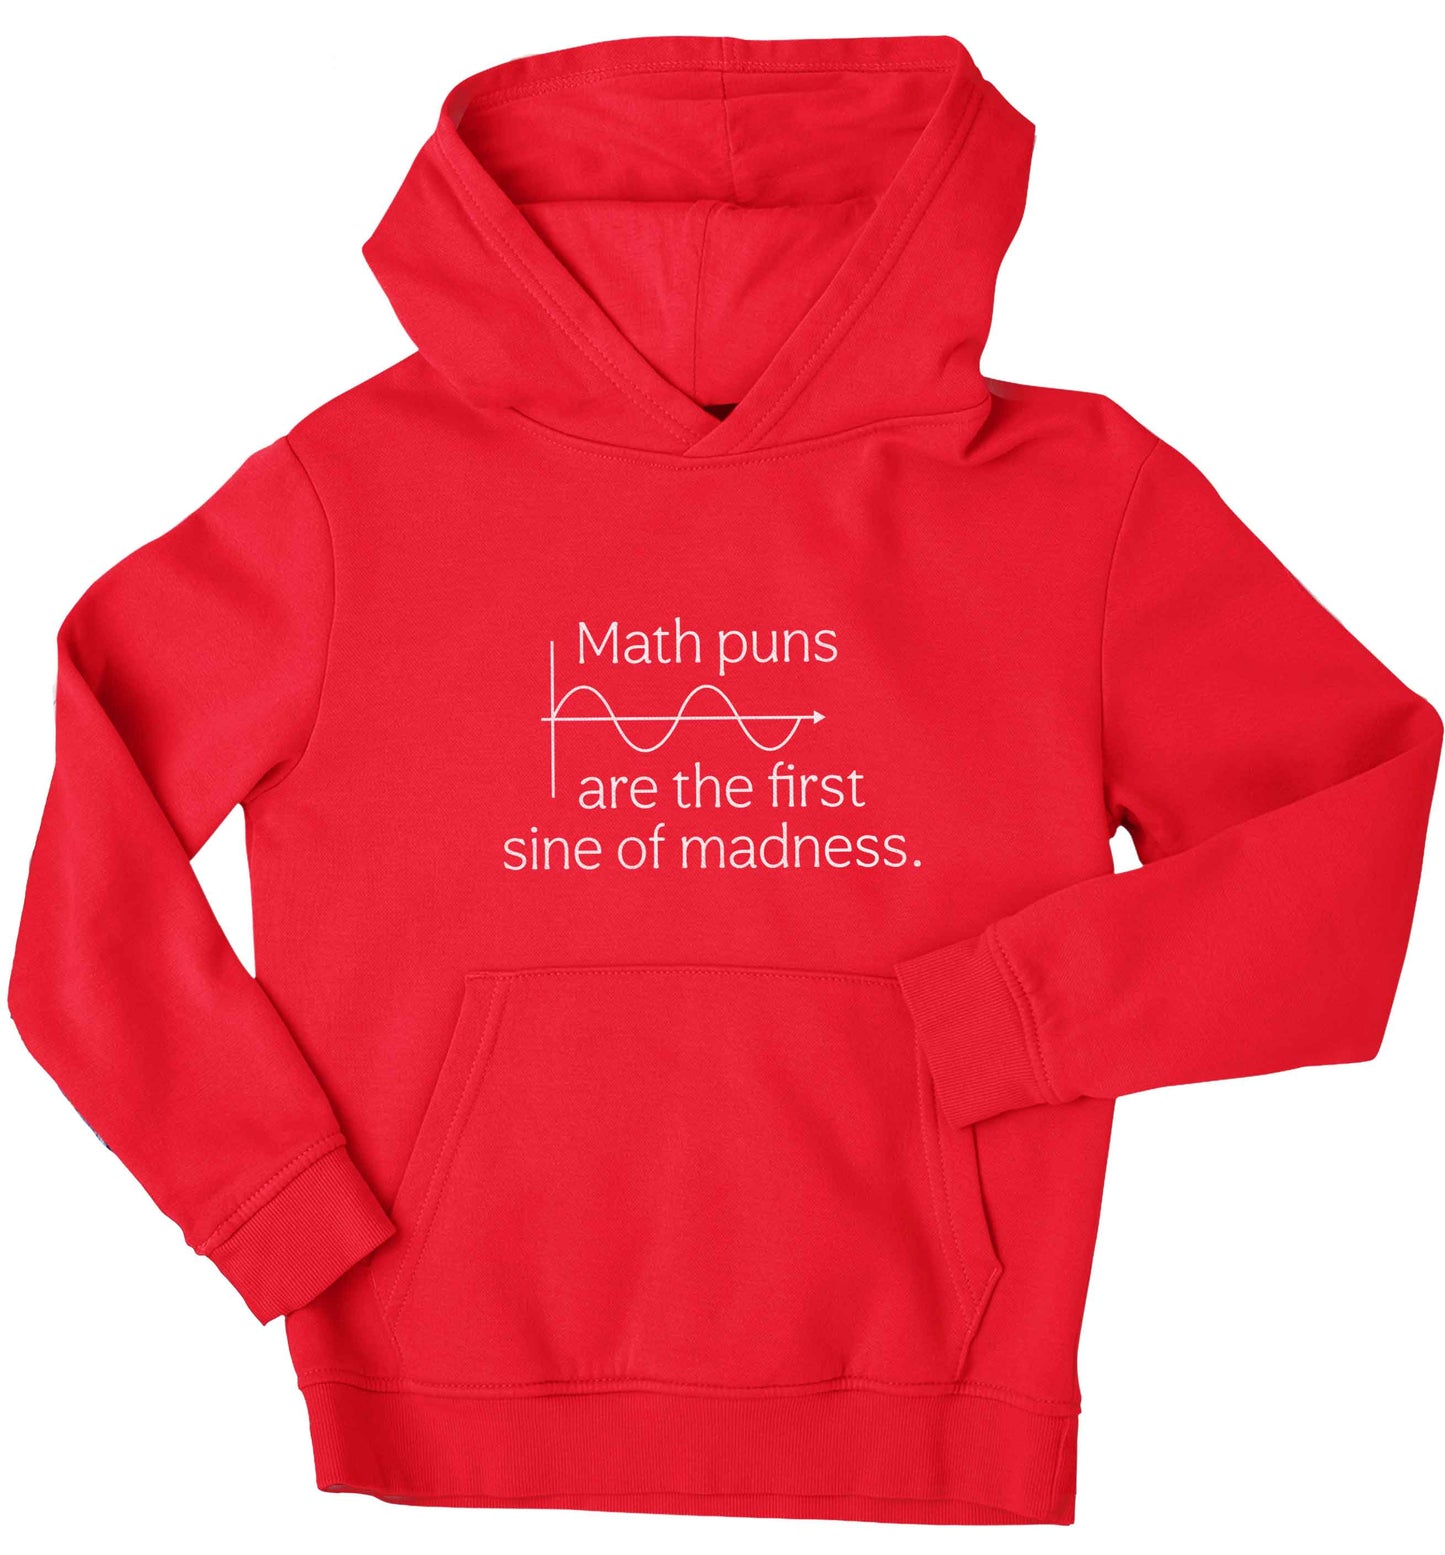 Math puns are the first sine of madness children's red hoodie 12-13 Years